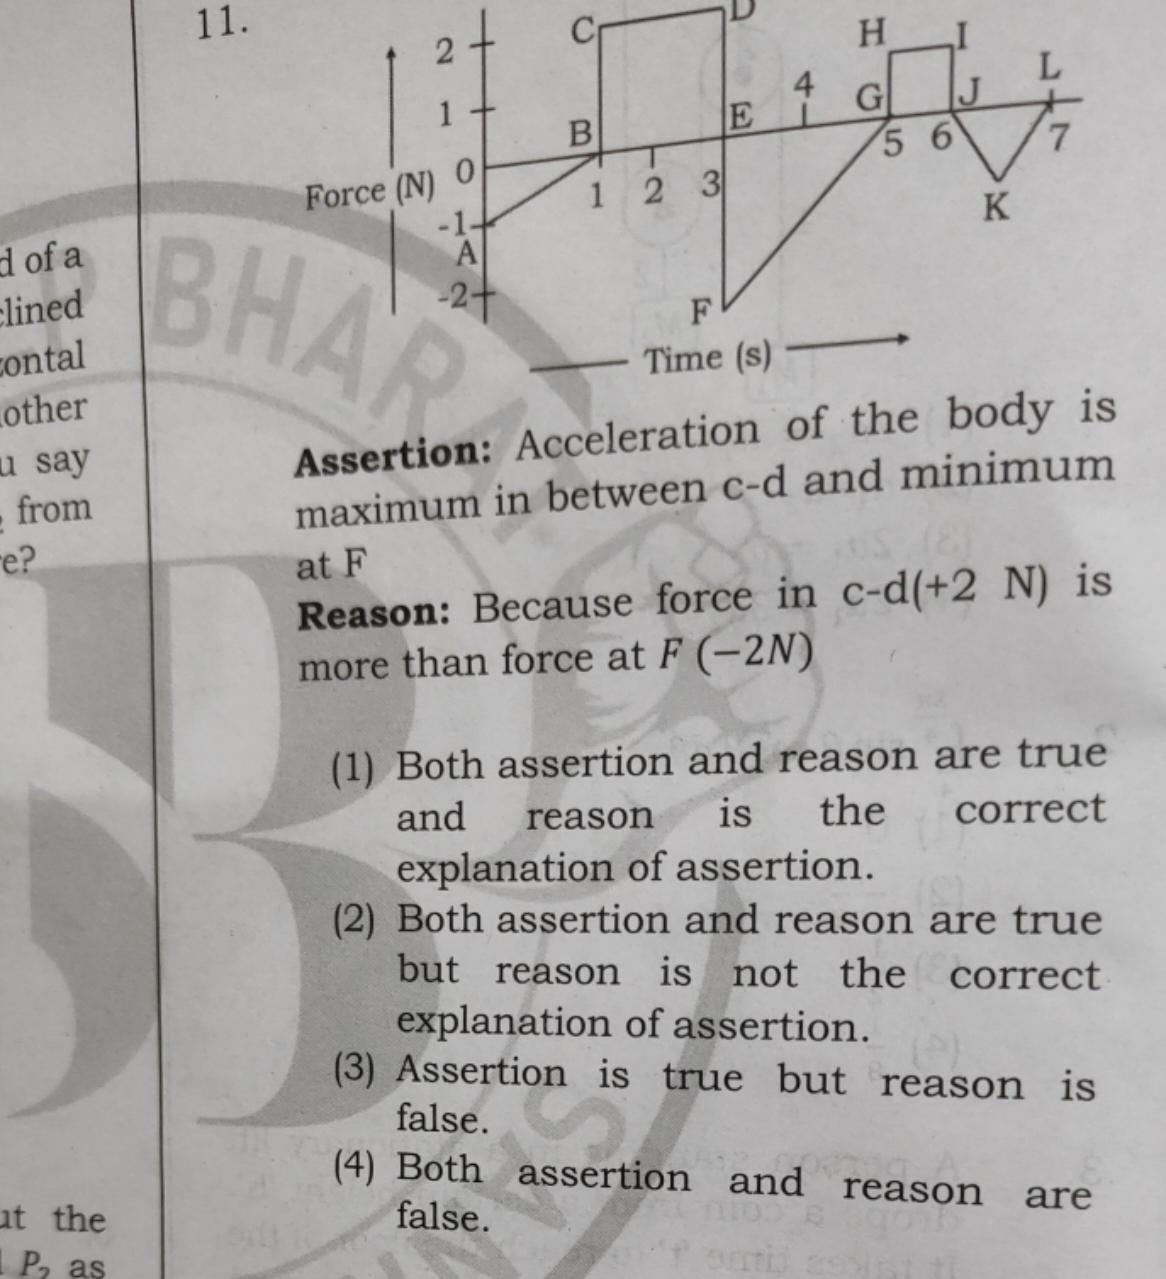 Assertion: Acceleration of the body is maximum in between c−d and mini